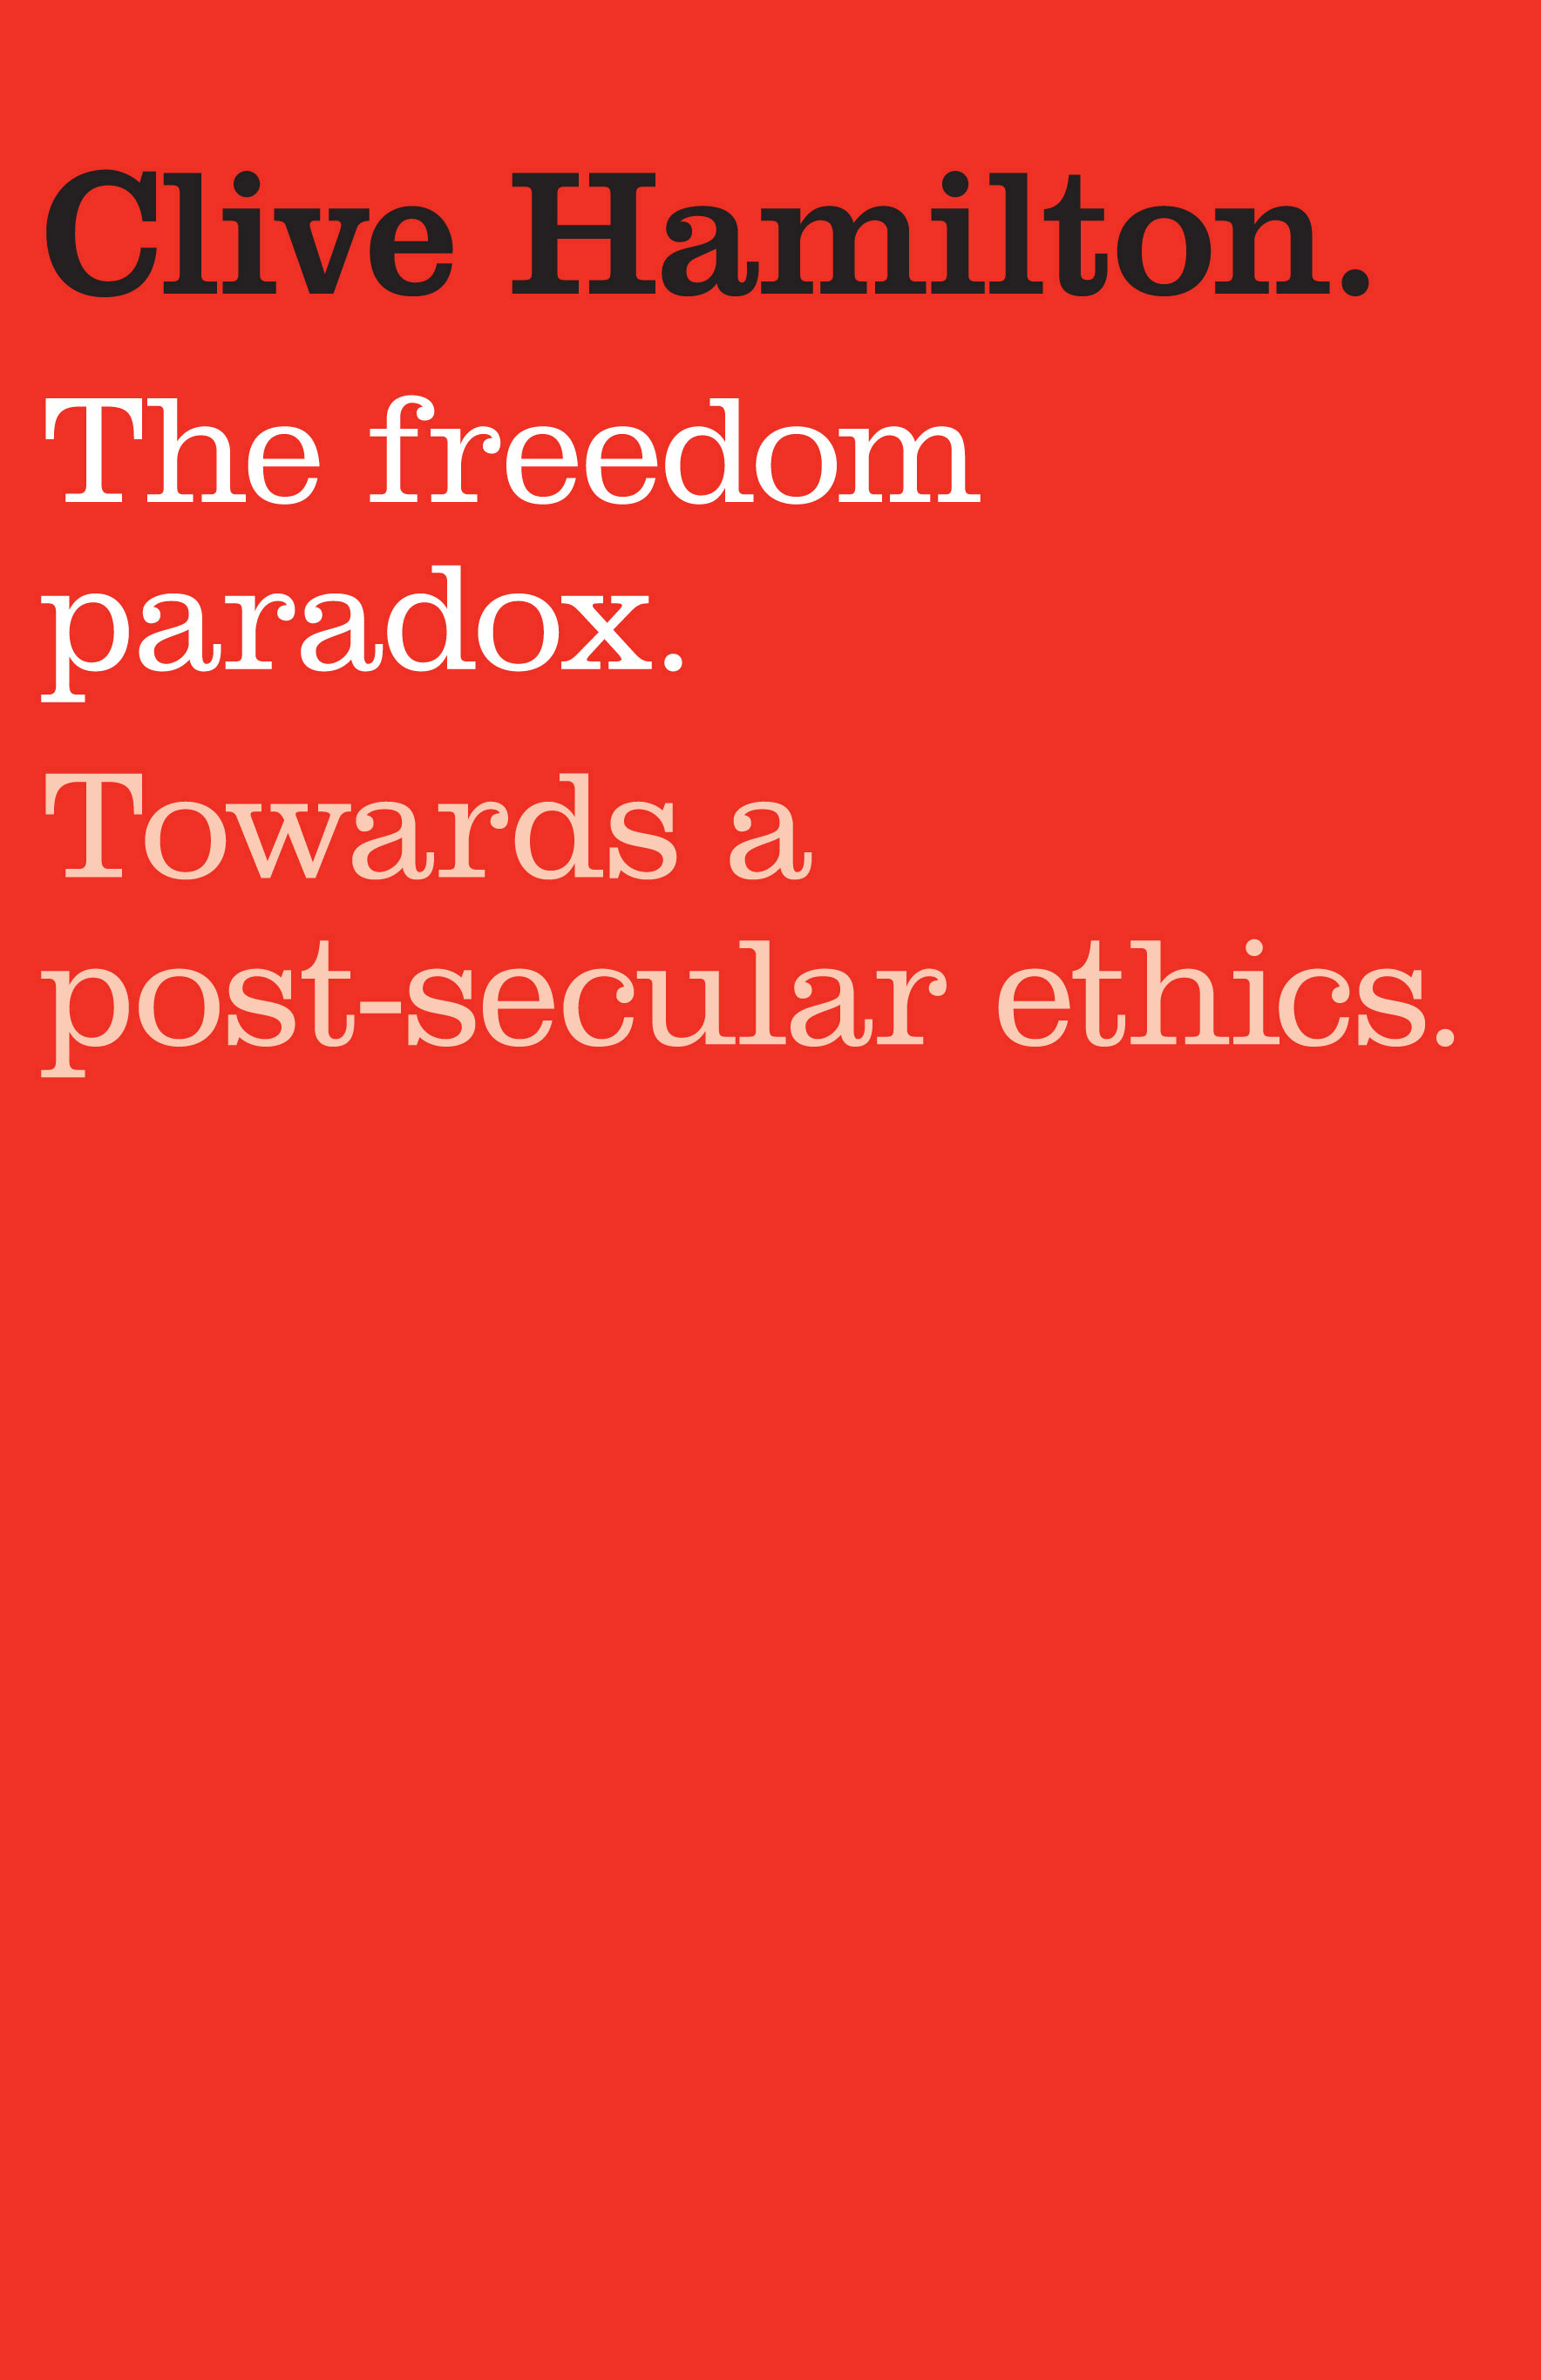 The Freedom Paradox: Towards a post-secular ethics